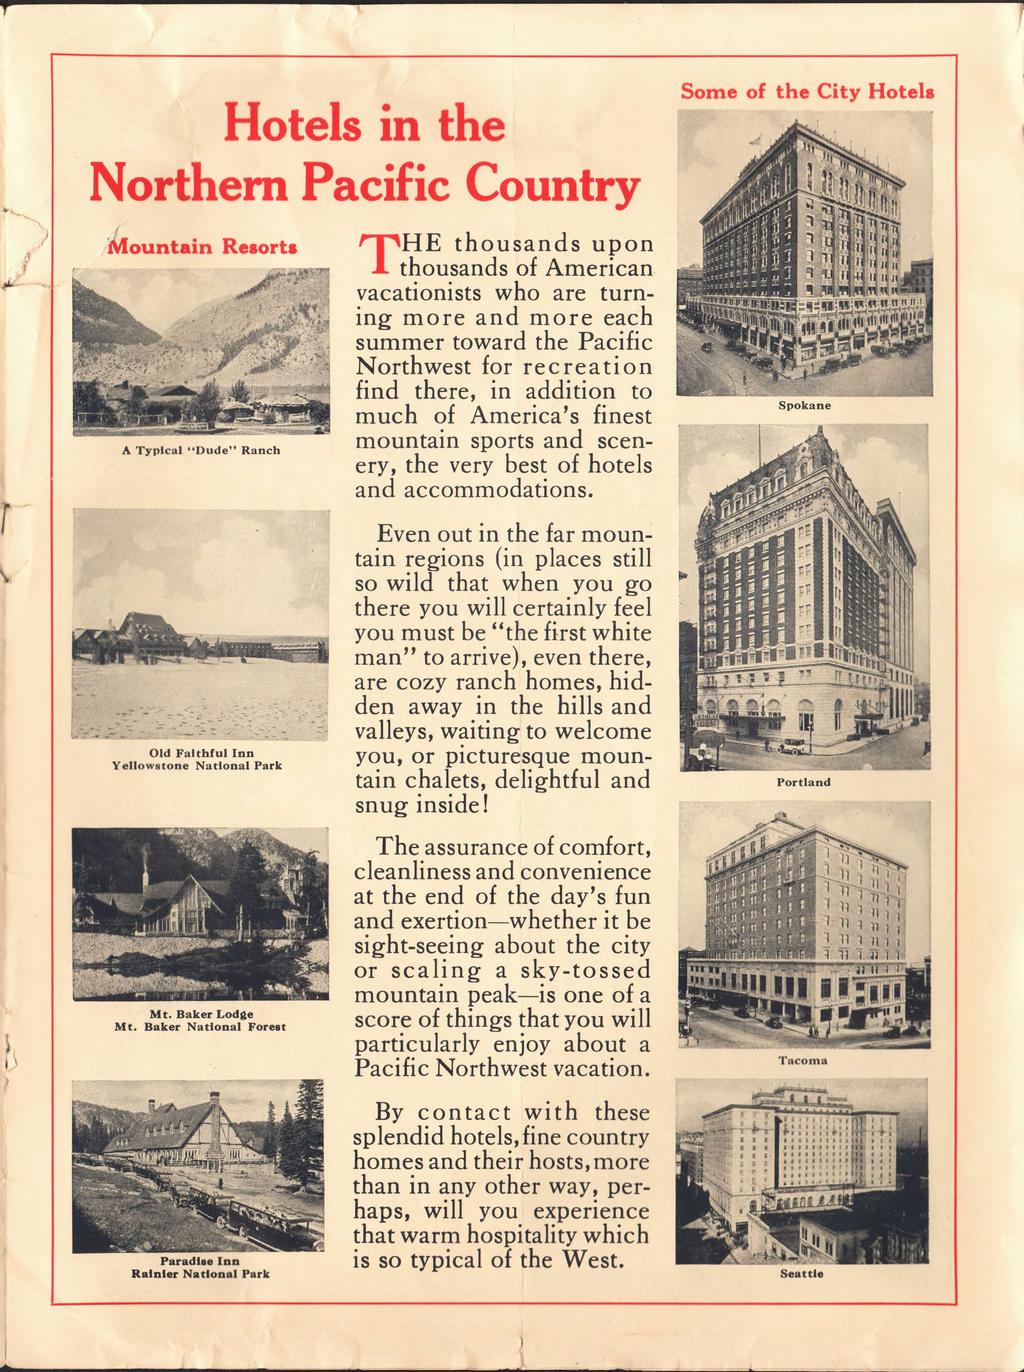 Hotels in the Northern Pacific Country Some of the City Hotels Mountain Resorts A Typical "Dude" Ranch Old Faithful Inn Yellowstone National Park Mt. Baker Lodge Mt.